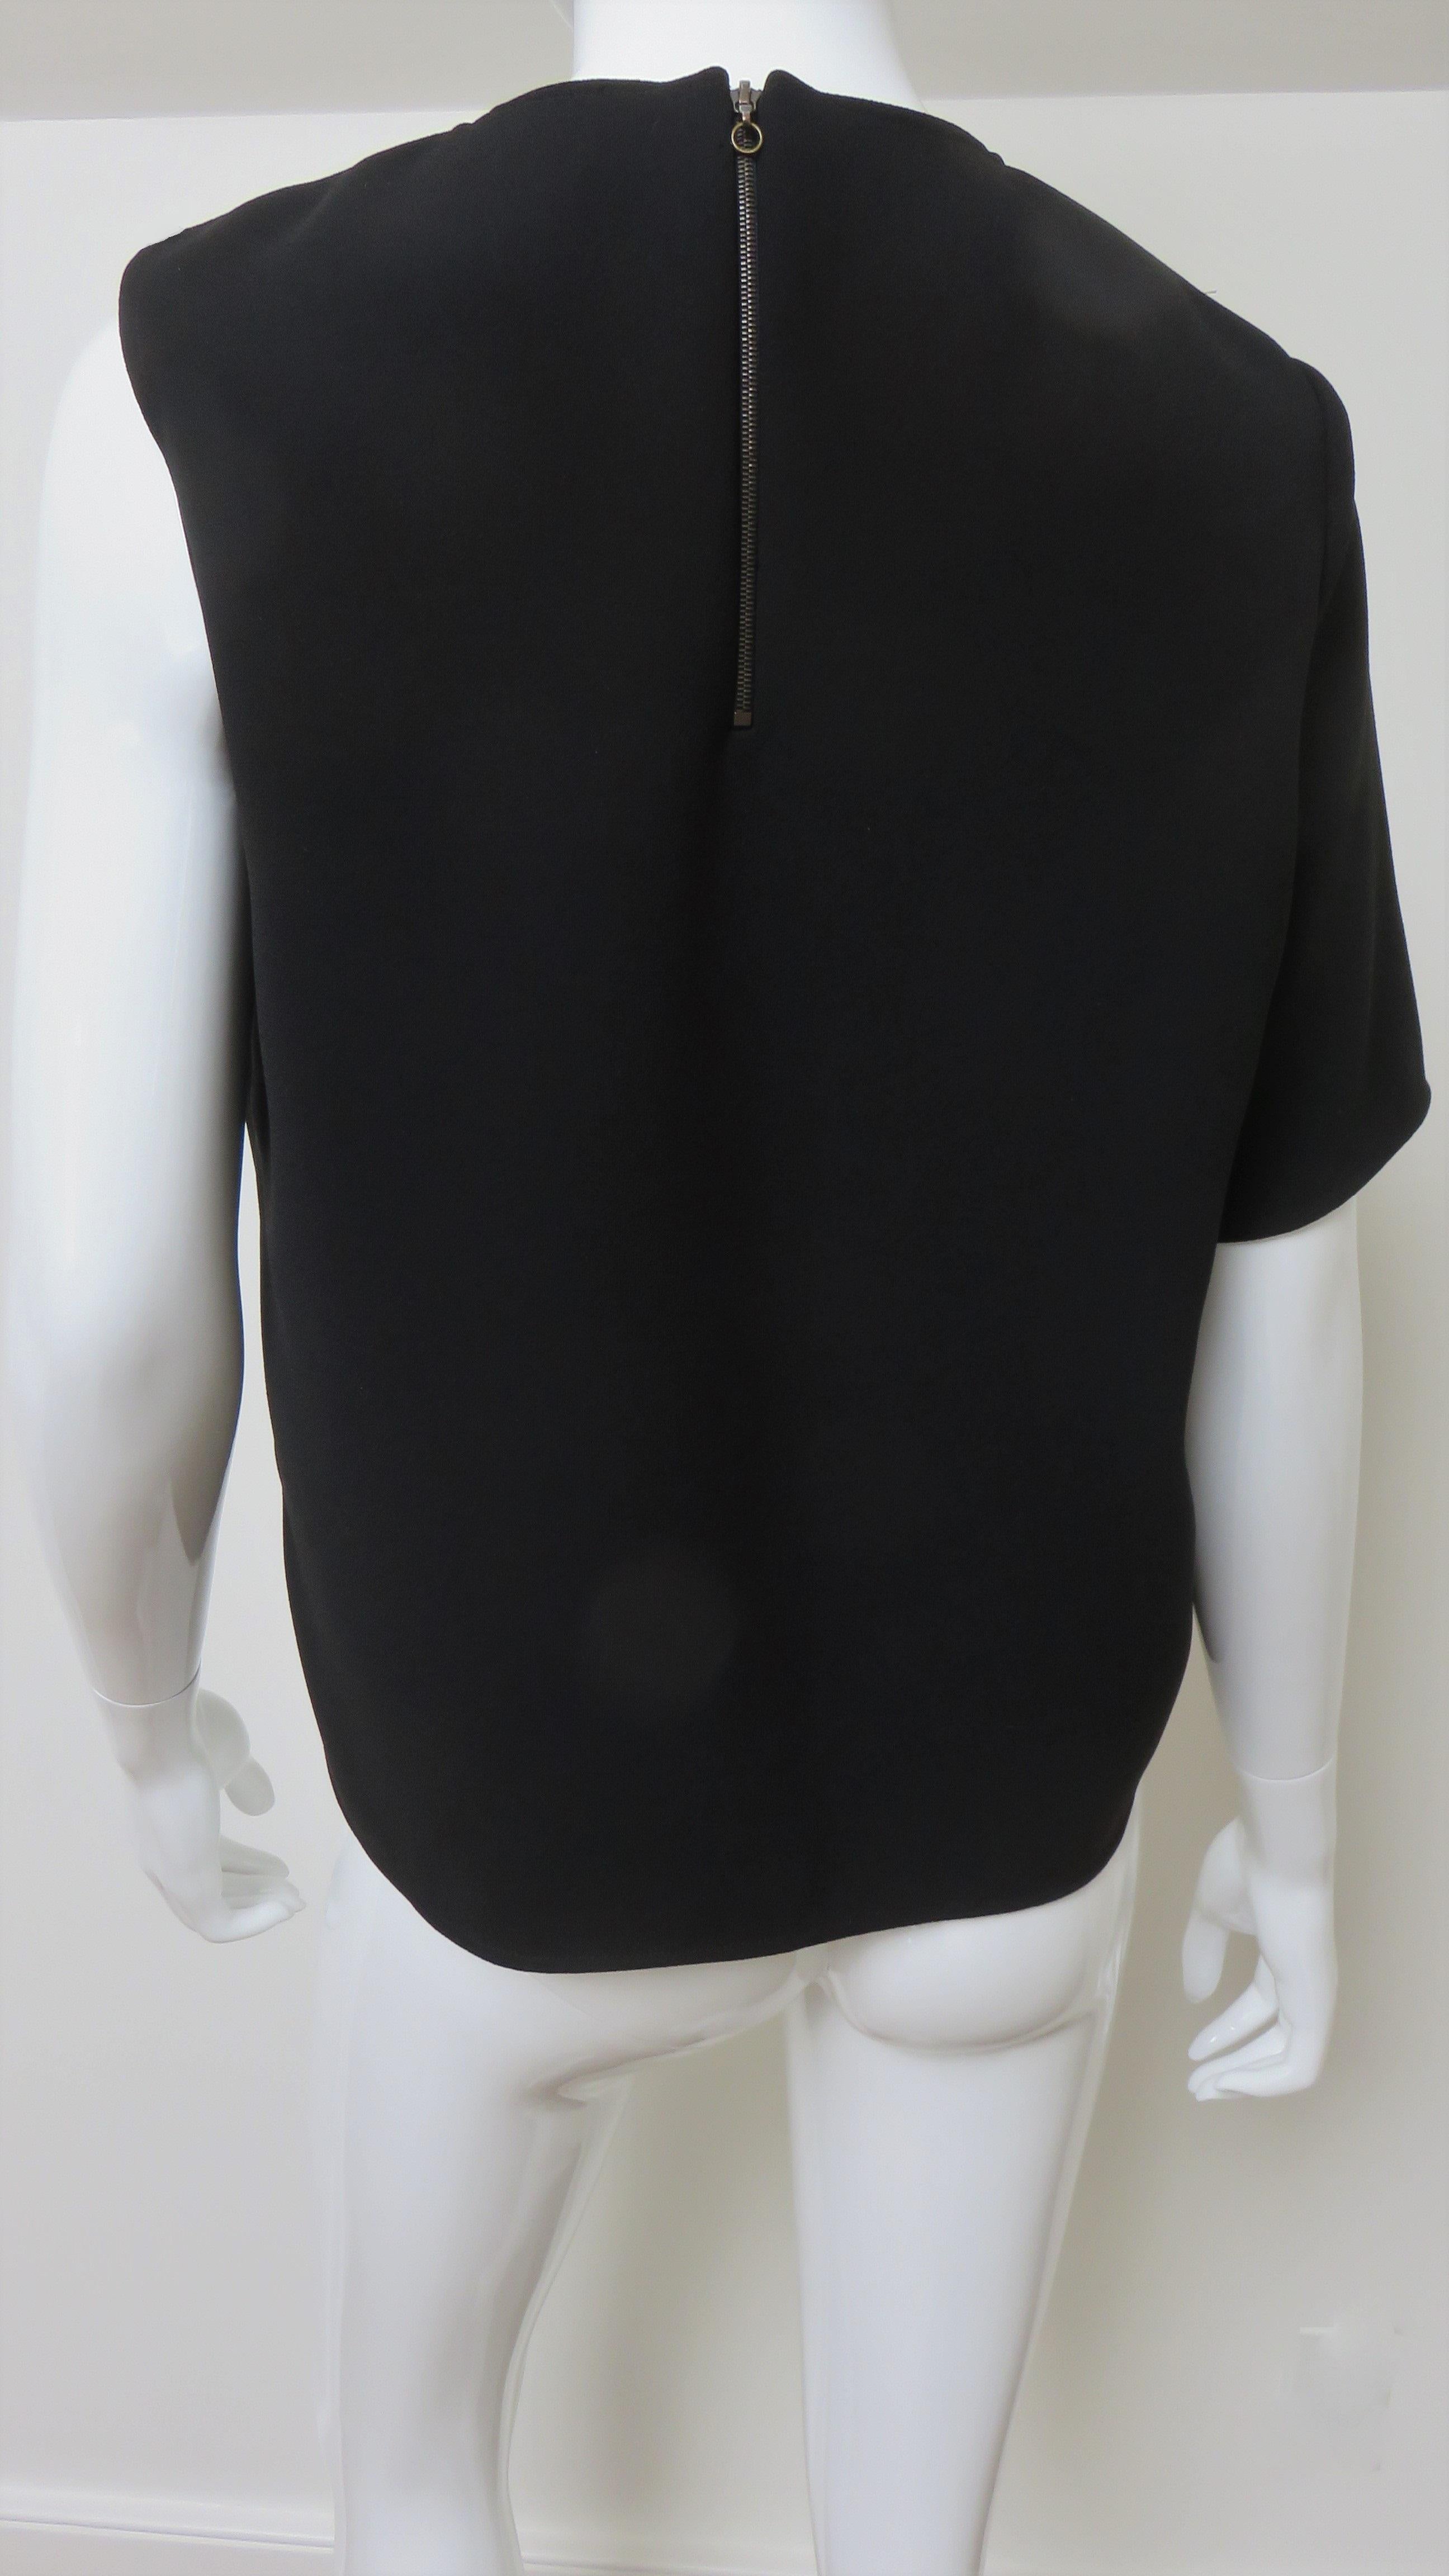 Anthony Vaccarello New One Sleeve Color Block Top with Applique 7